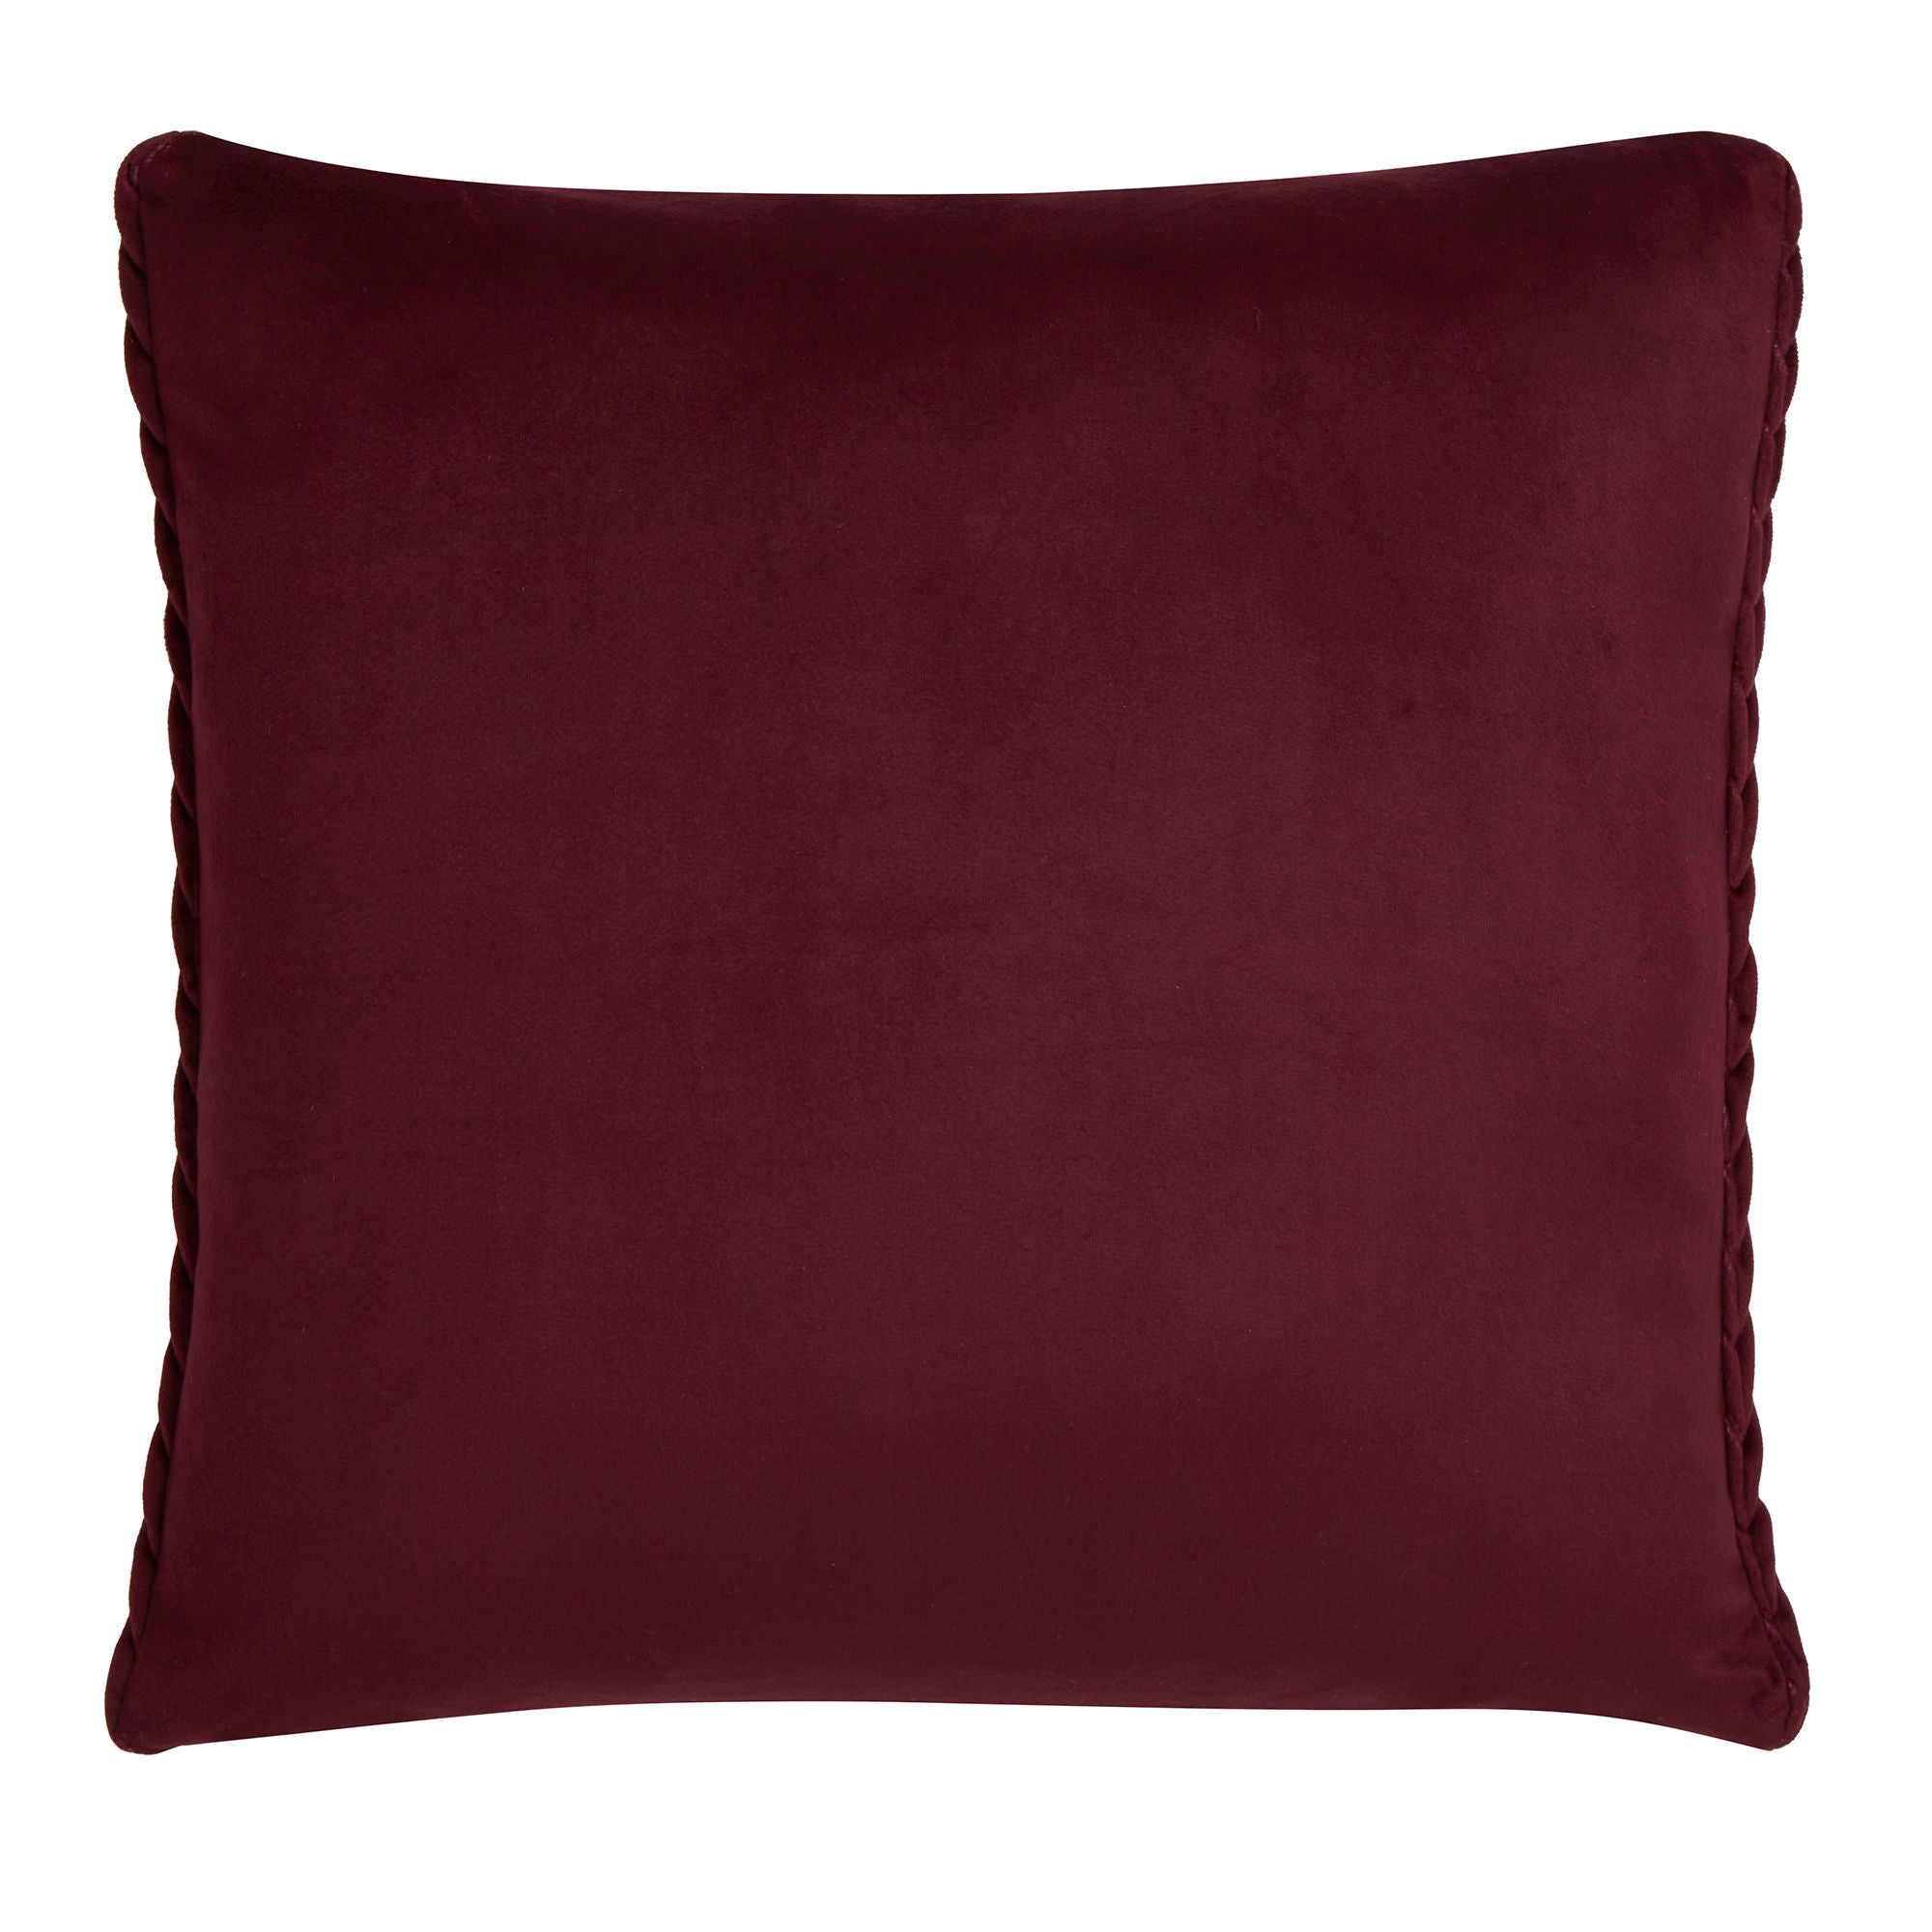 Amory Cushion by Laurence Llewelyn-Bowen in Wine 43 x 43cm - Cushion - Laurence Llewelyn-Bowen